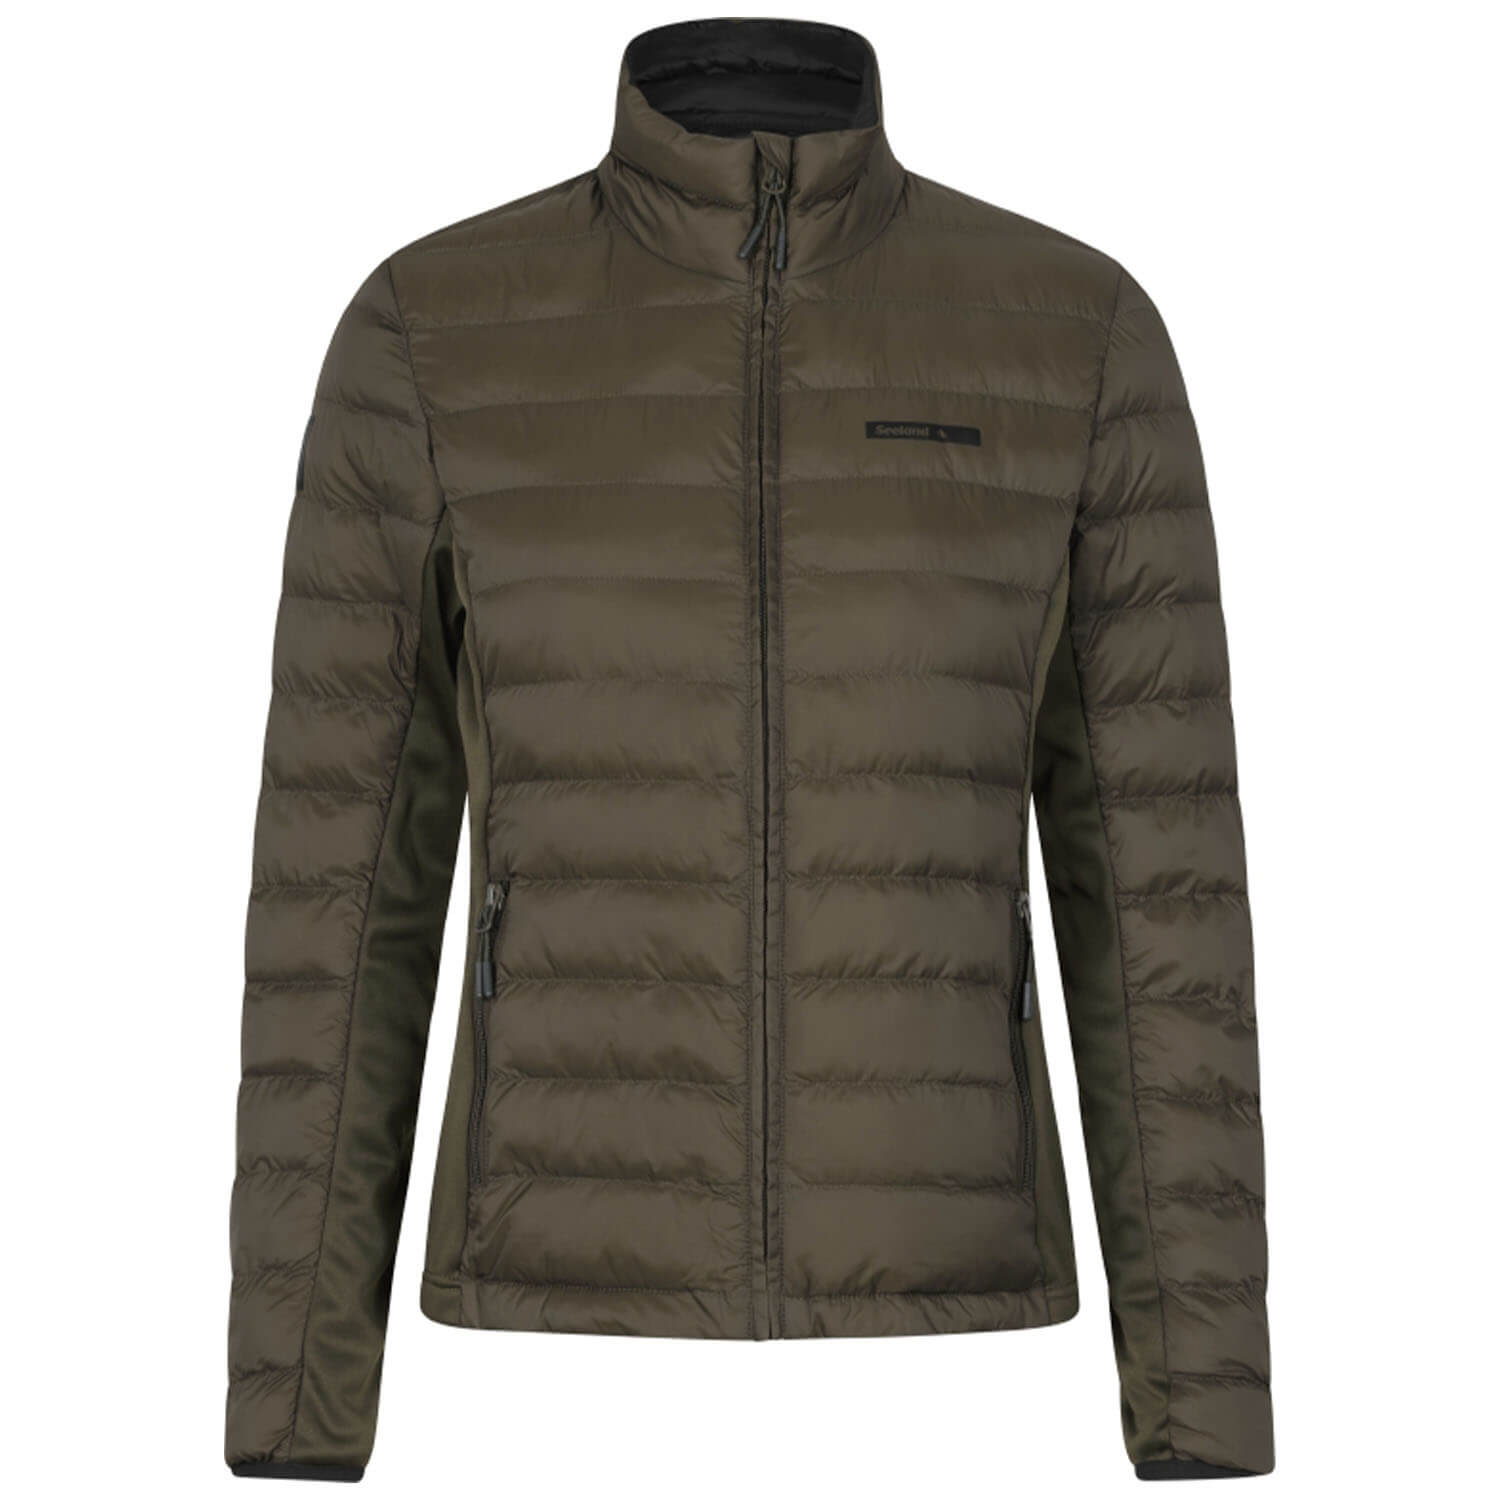 Seeland women quilted jacket therma (Light Pine) - Hunting Jackets